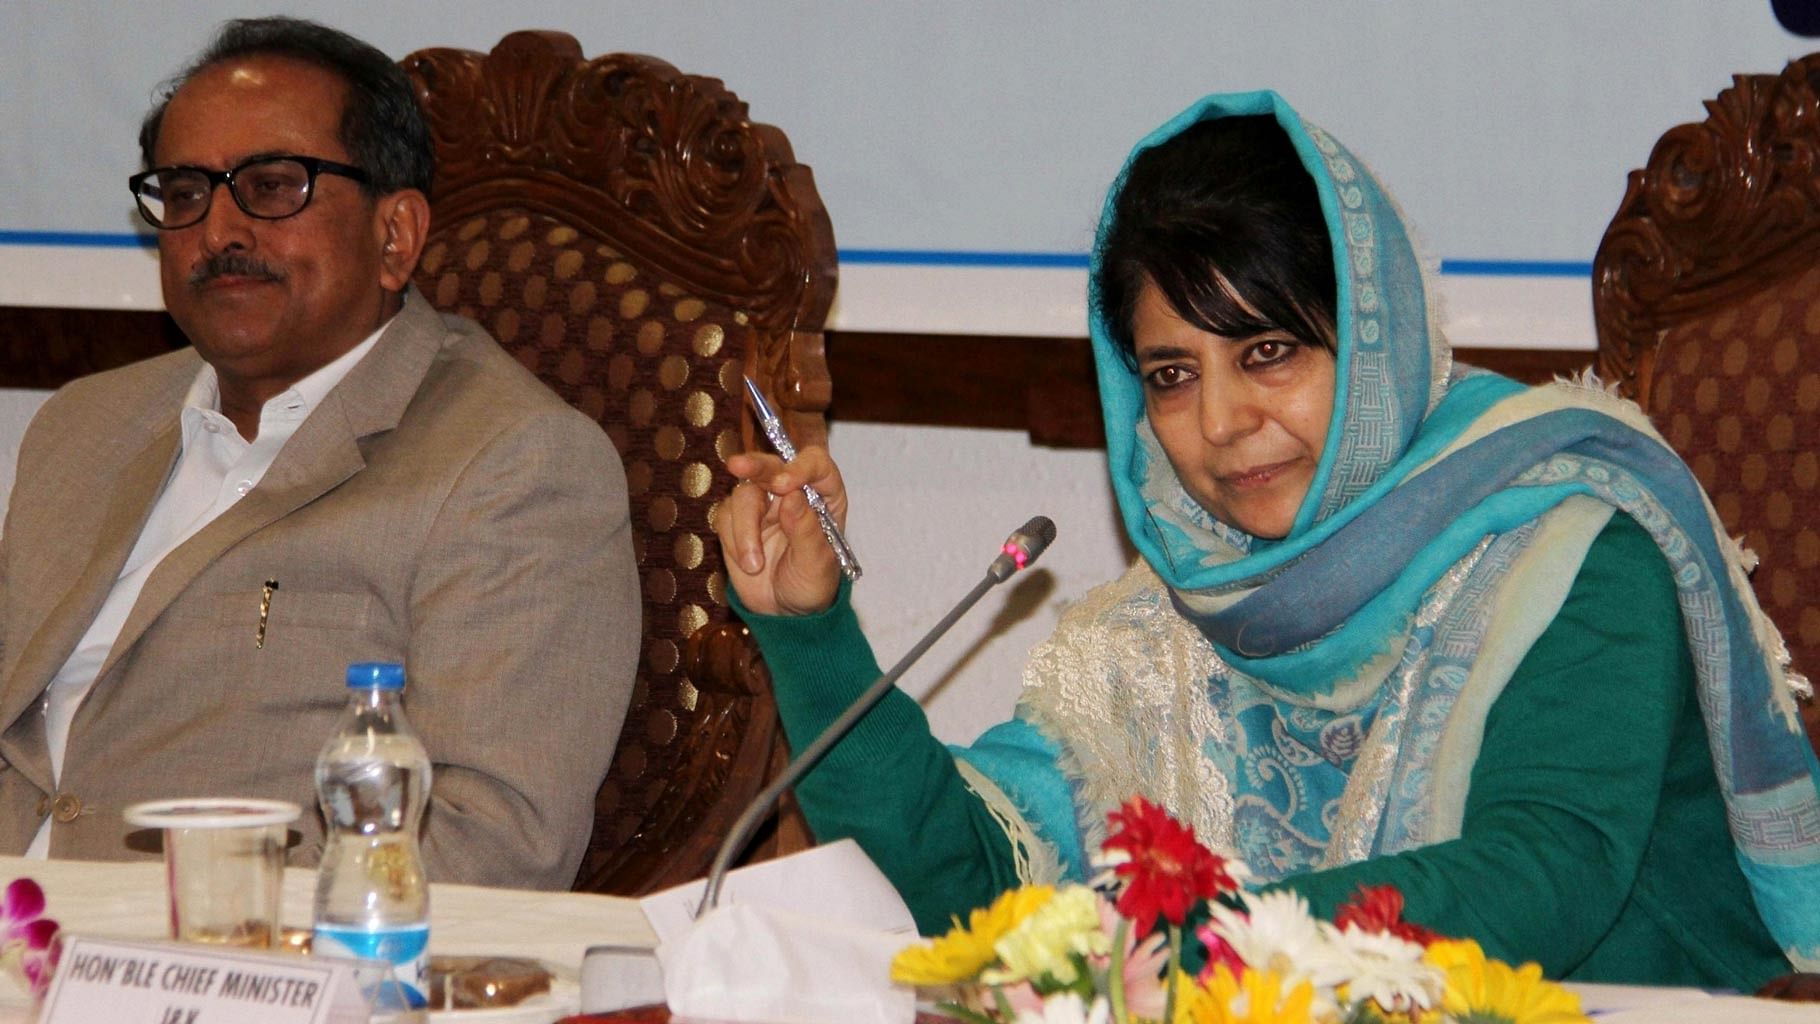 File photo of Chief Minister of Jammu and Kashmir Mehbooba Mufti (right) with Deputy Chief Minister Nirmal Singh. (Photo: IANS)